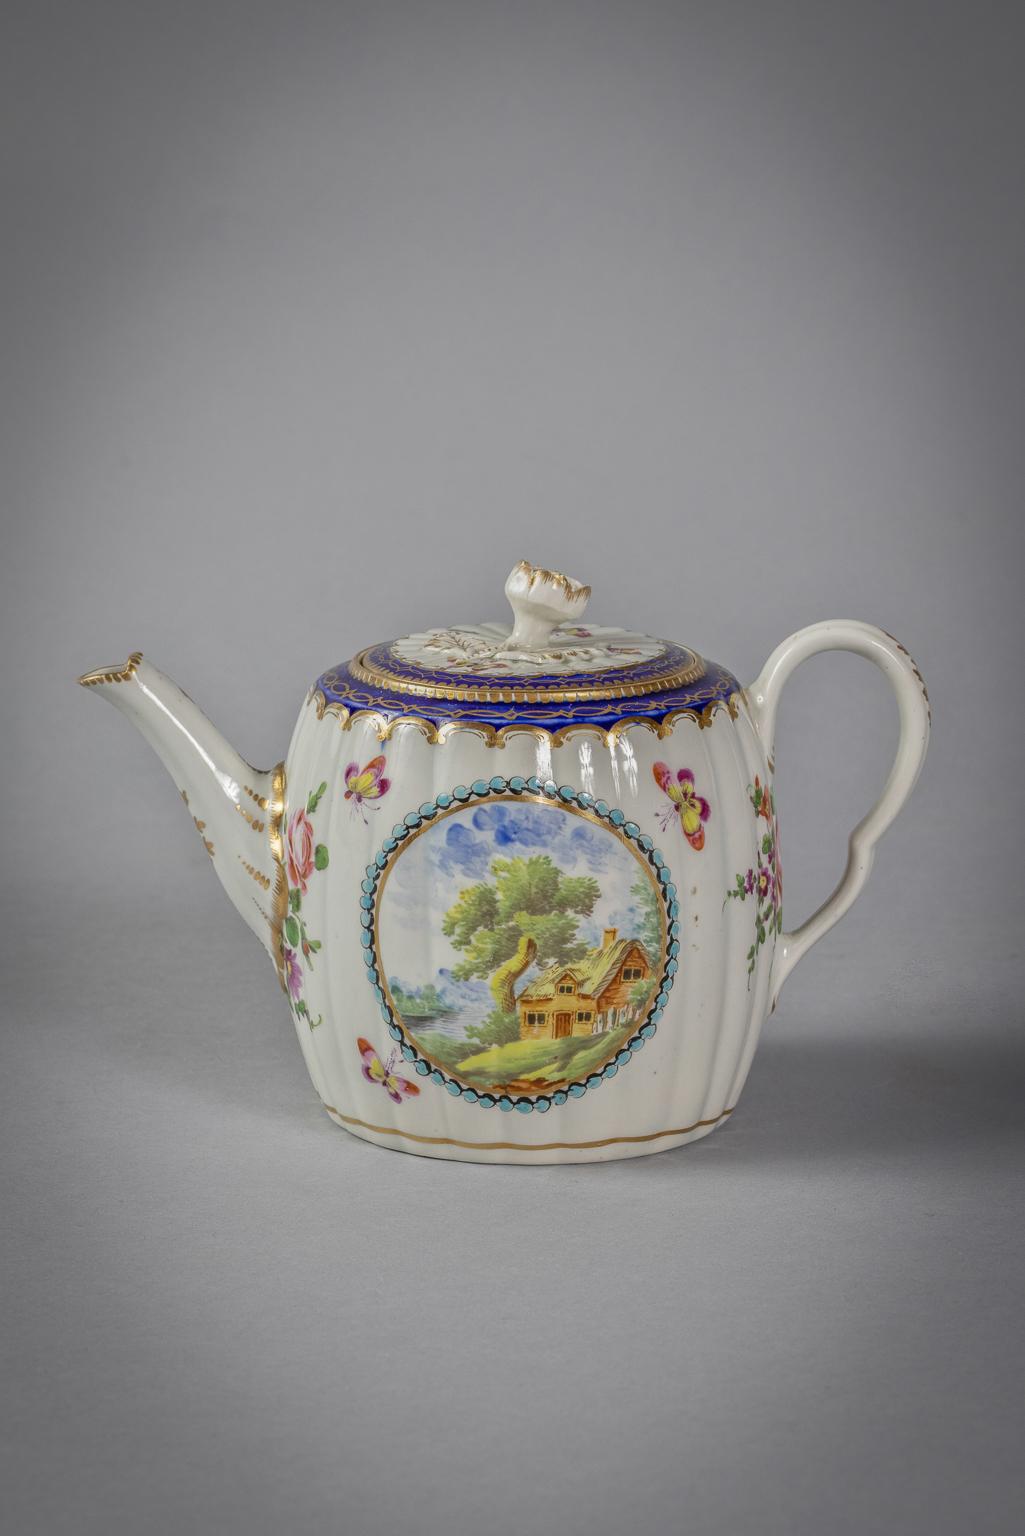 Each painted with landscape roundels flanked by flower sprays within a narrow blue and gilt border, comprising: a fluted barrel-shaped teapot and cover and a hexagonal fluted stand; a covered sugar and another hexagonal fluted teapot stand, open